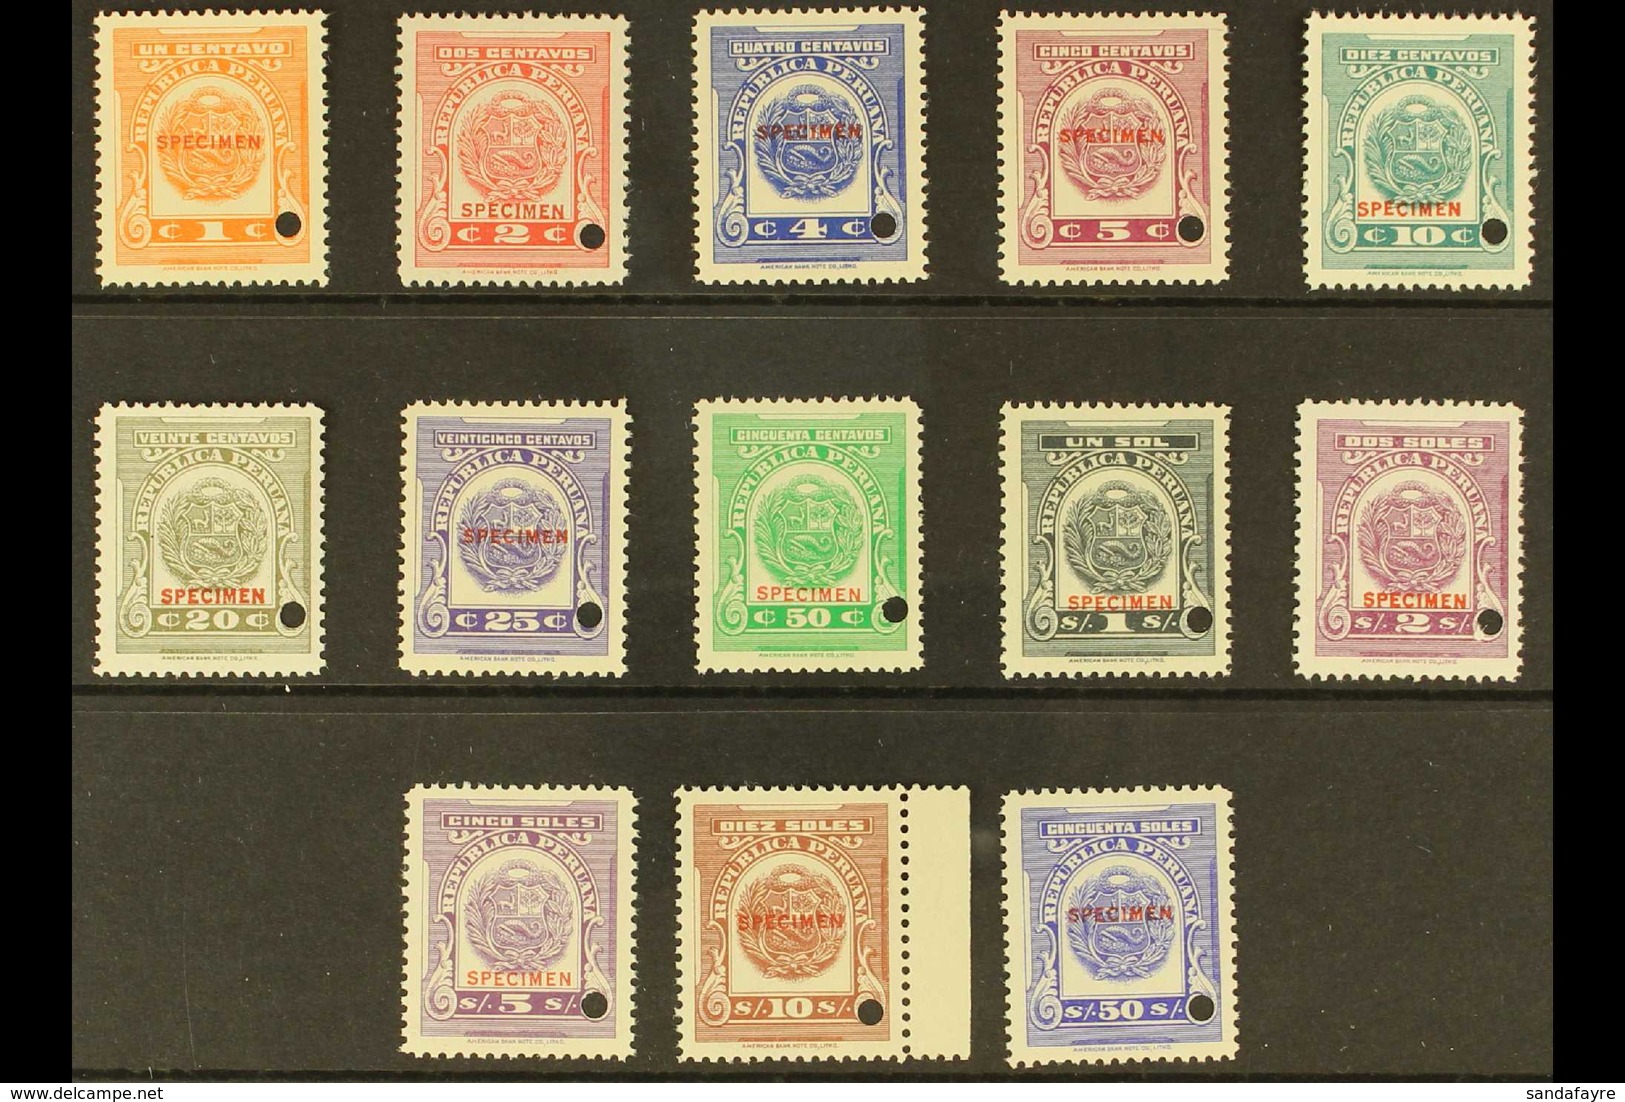 REVENUES DOCUMENT STAMPS 1937 Complete Set With "SPECIMEN" Overprints And Small Security Punch Holes, Never Hinged Mint, - Peru